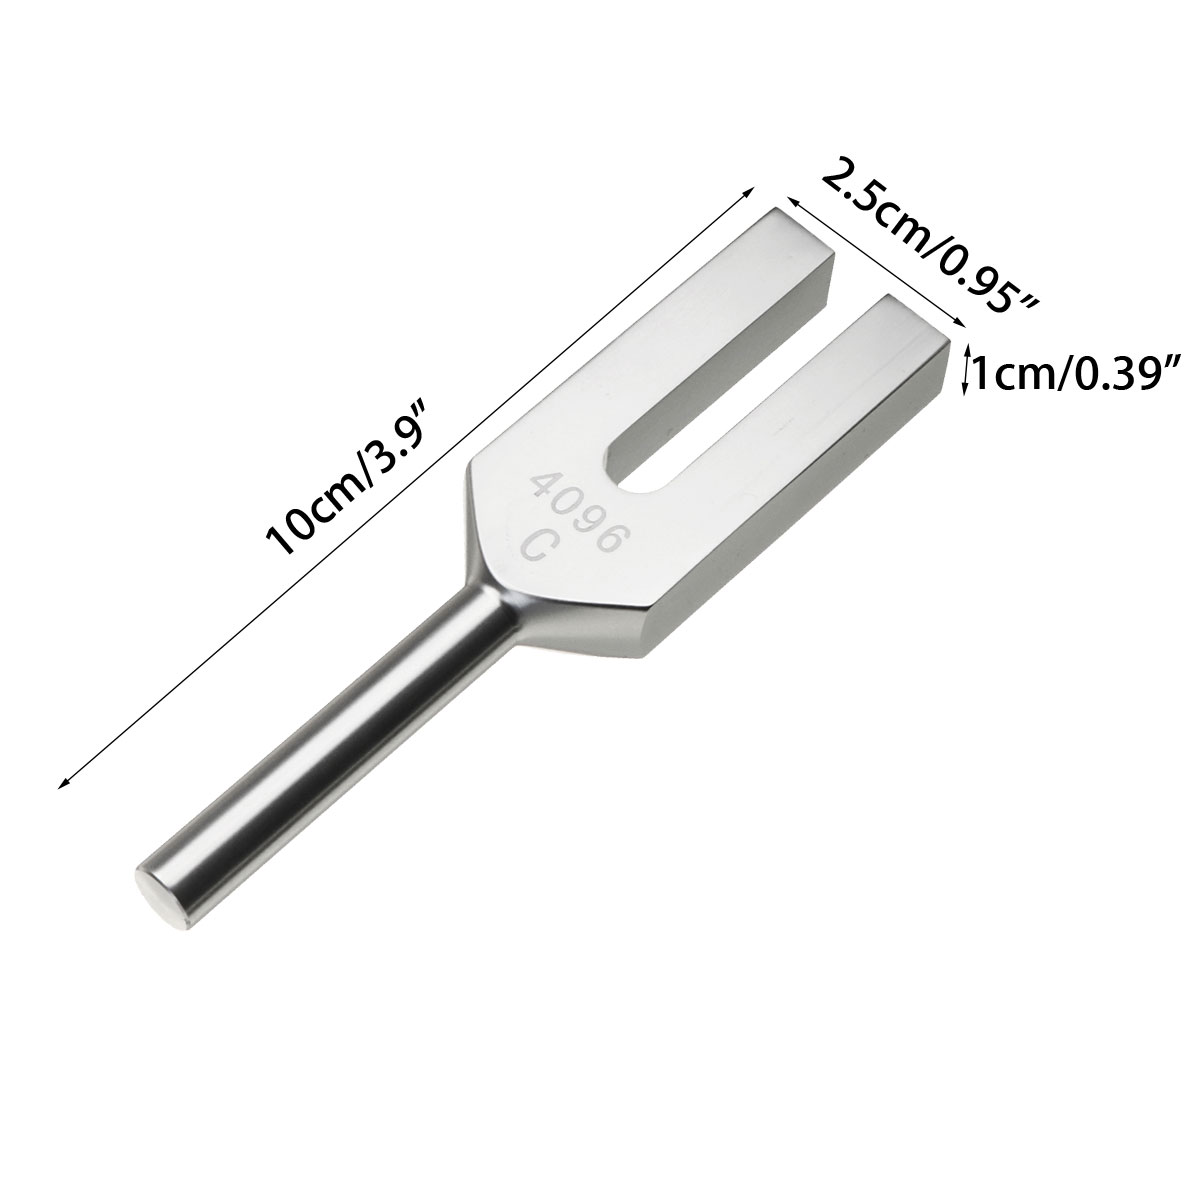 4096Hz-Aluminum-Musical-Tuning-Fork-Instrument-for-Healing-Sound-Vibration-Therapy-Tools-1282655-5